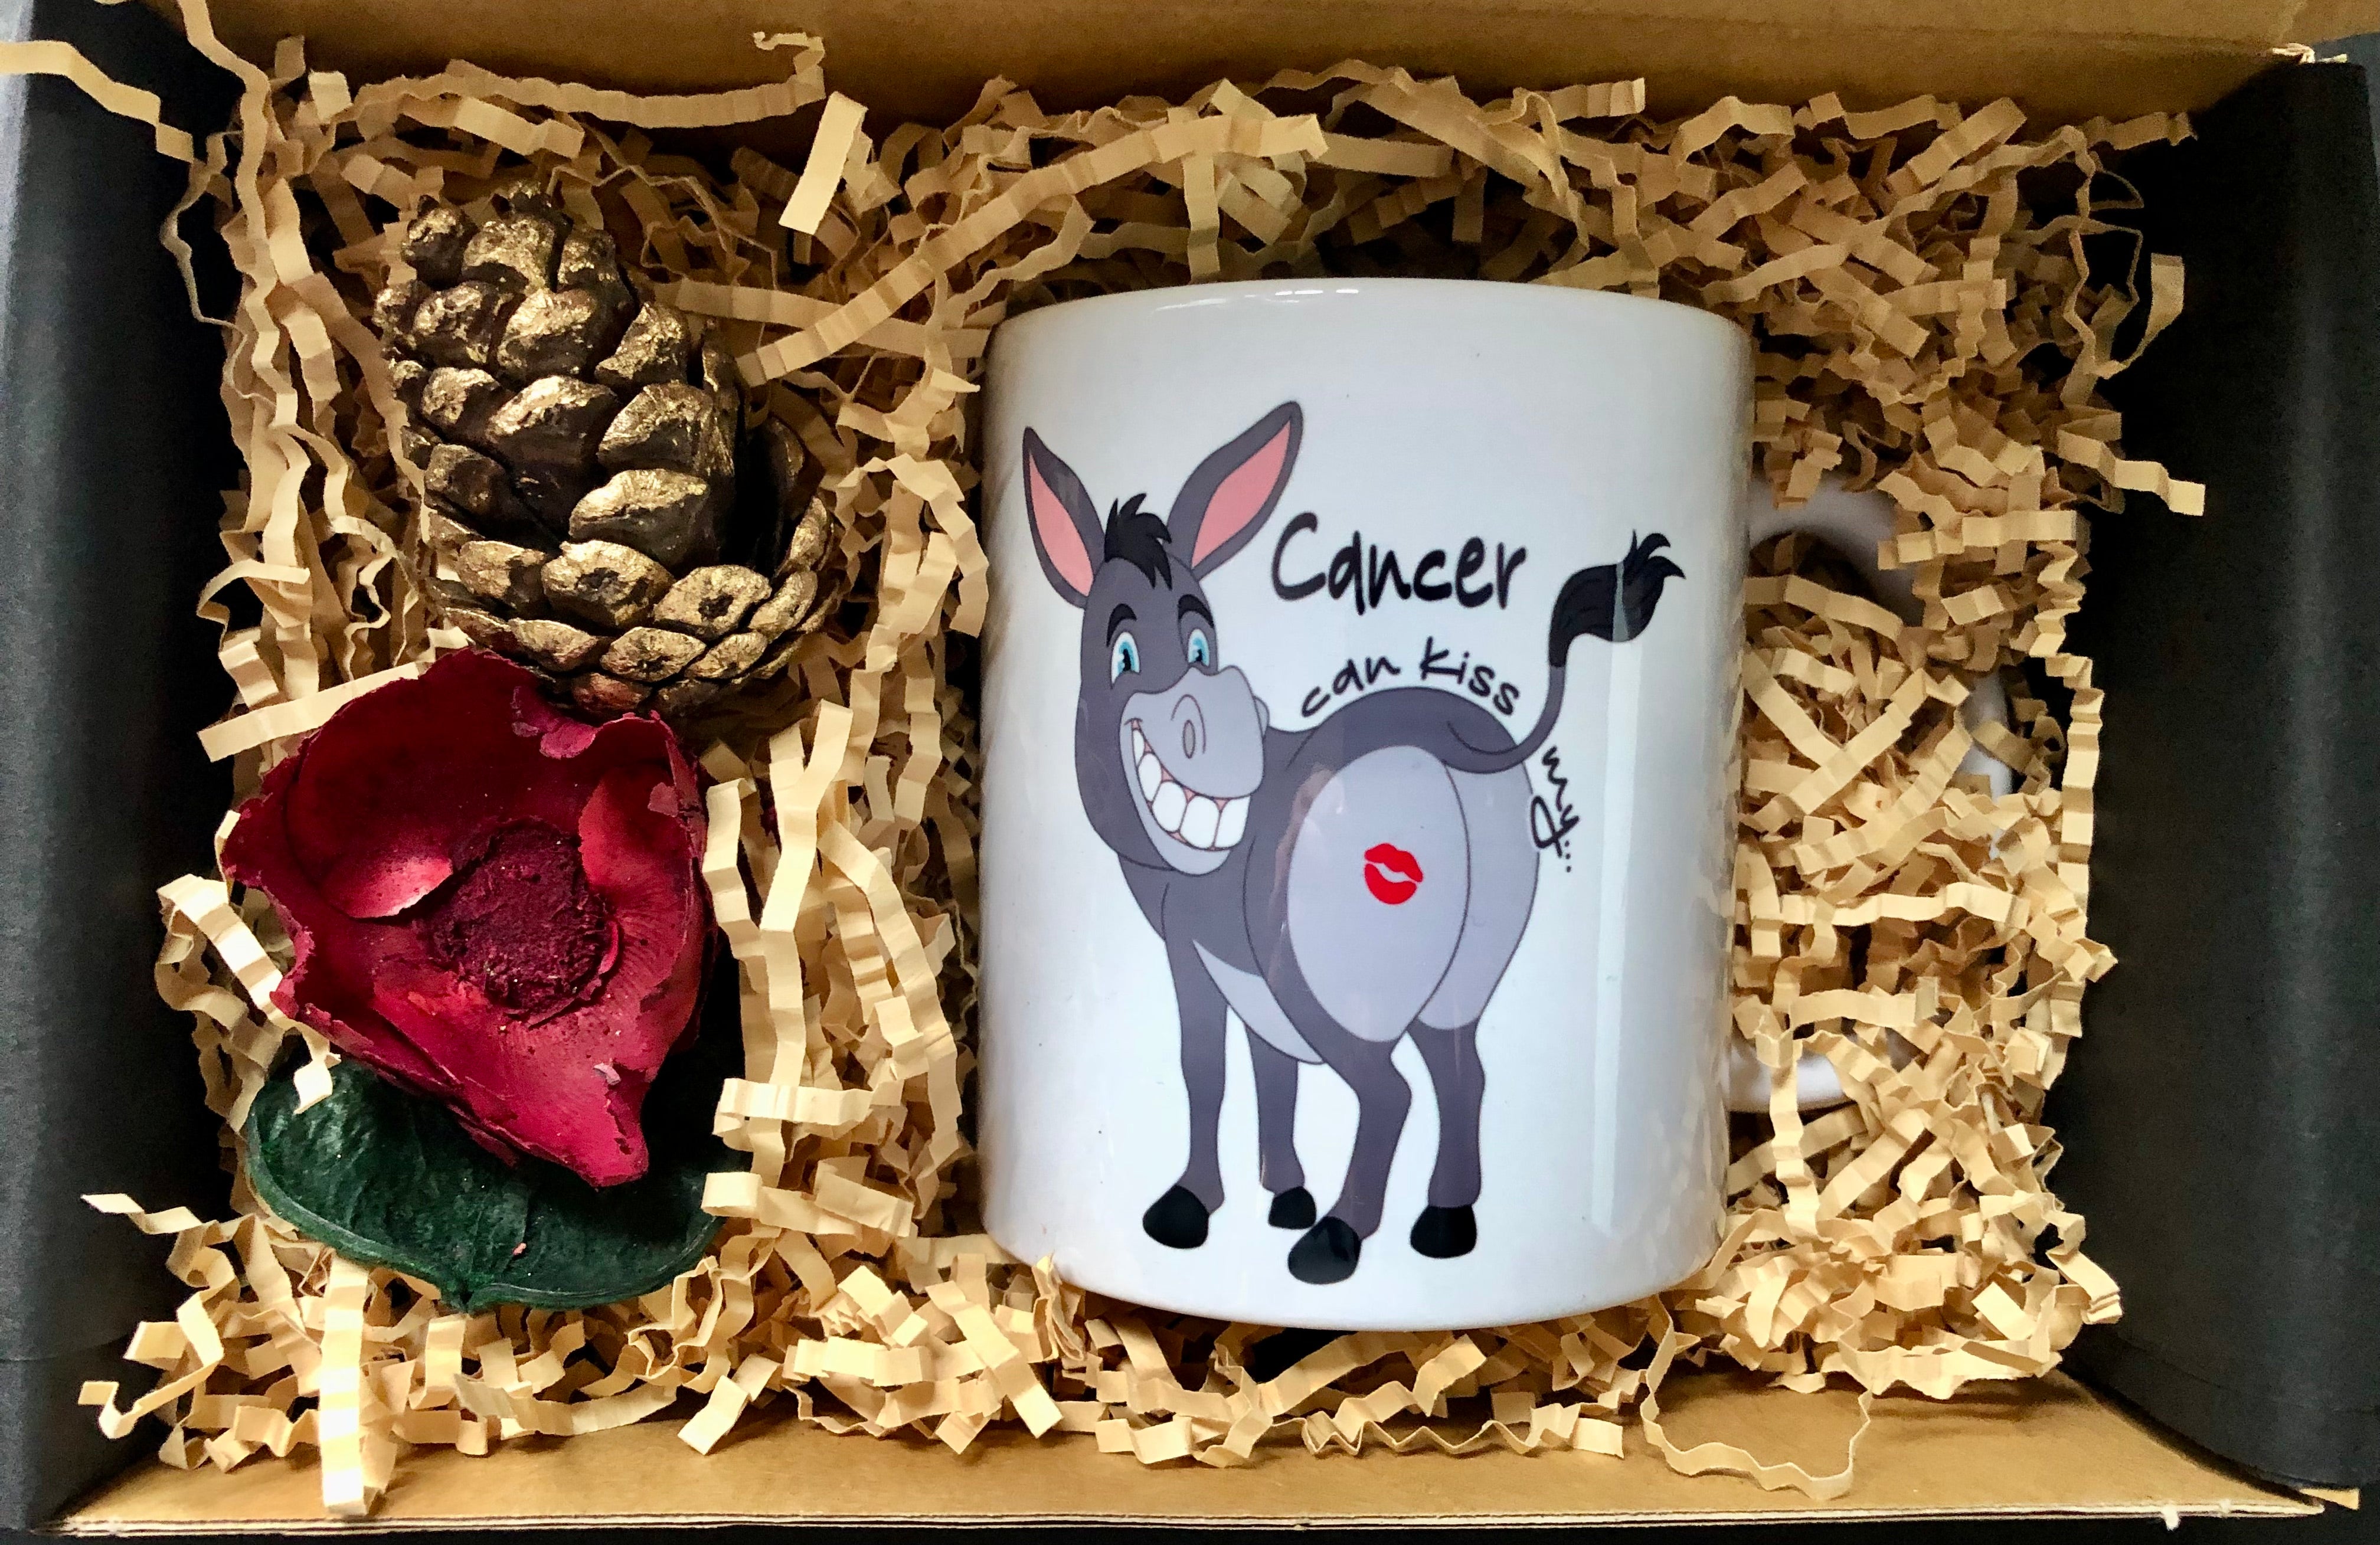 Cancer can kiss my…. - Funny Cancer Get Well Mug